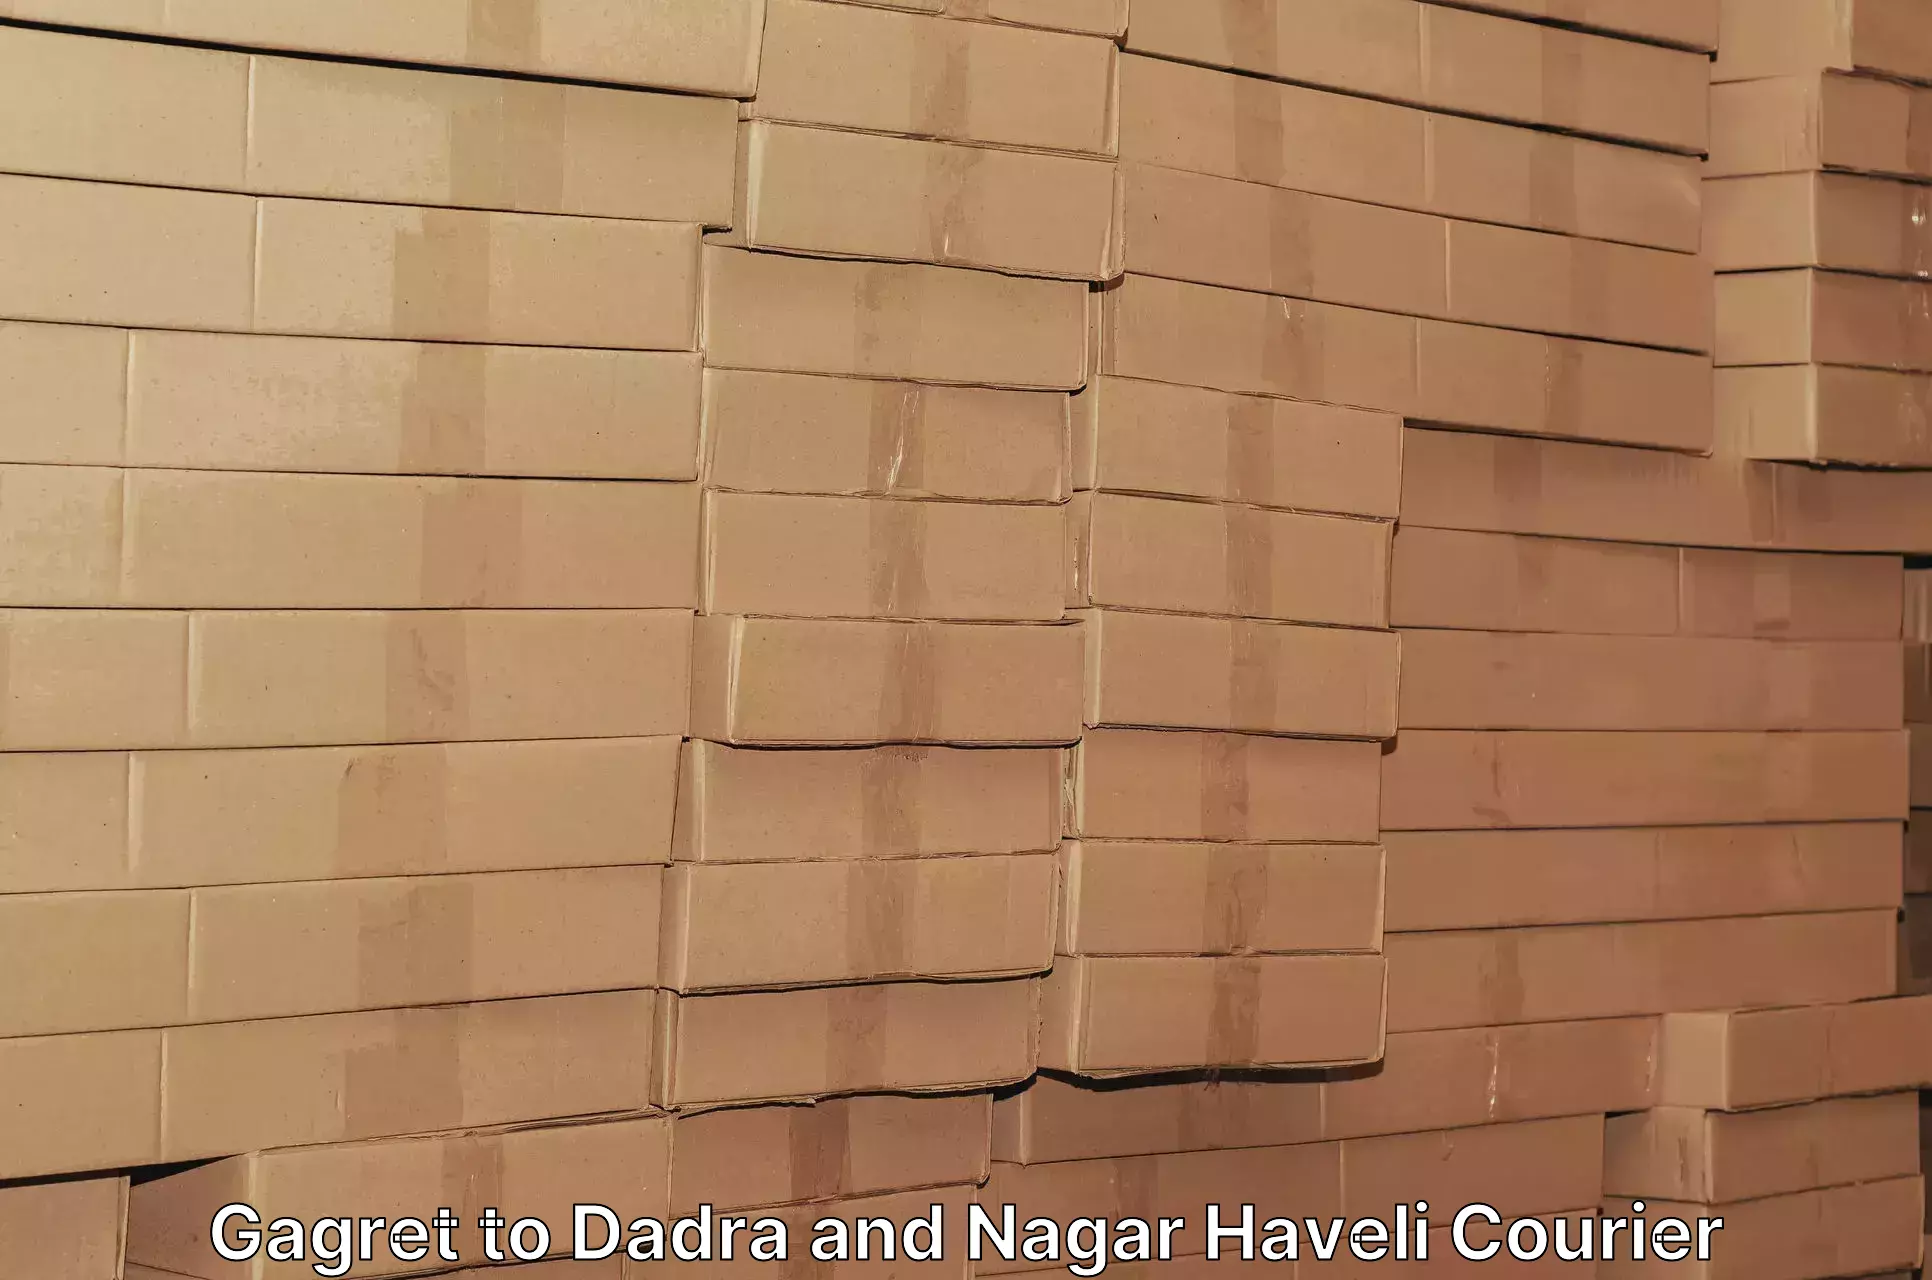 Courier app in Gagret to Dadra and Nagar Haveli